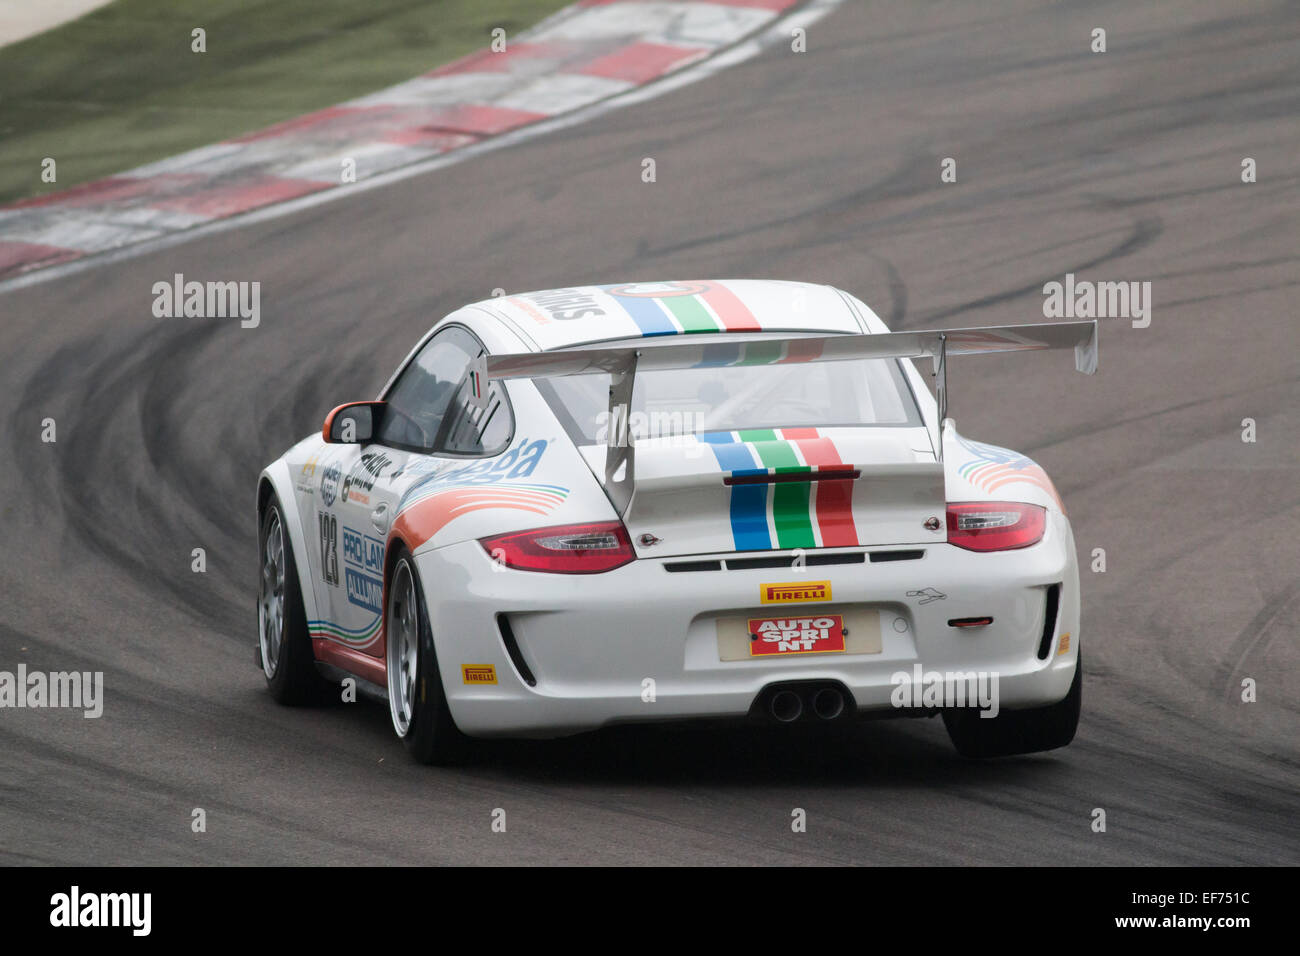 Imola, Italy - October 11, 2014: A Porsche 997 Cup Gtc of Drive Technology Italia team, driven By Bodega Giuseppe and Maestri Stefano, the C.I. Gran Turismo car racing on October 11, 2014 in Imola, Italy. Stock Photo